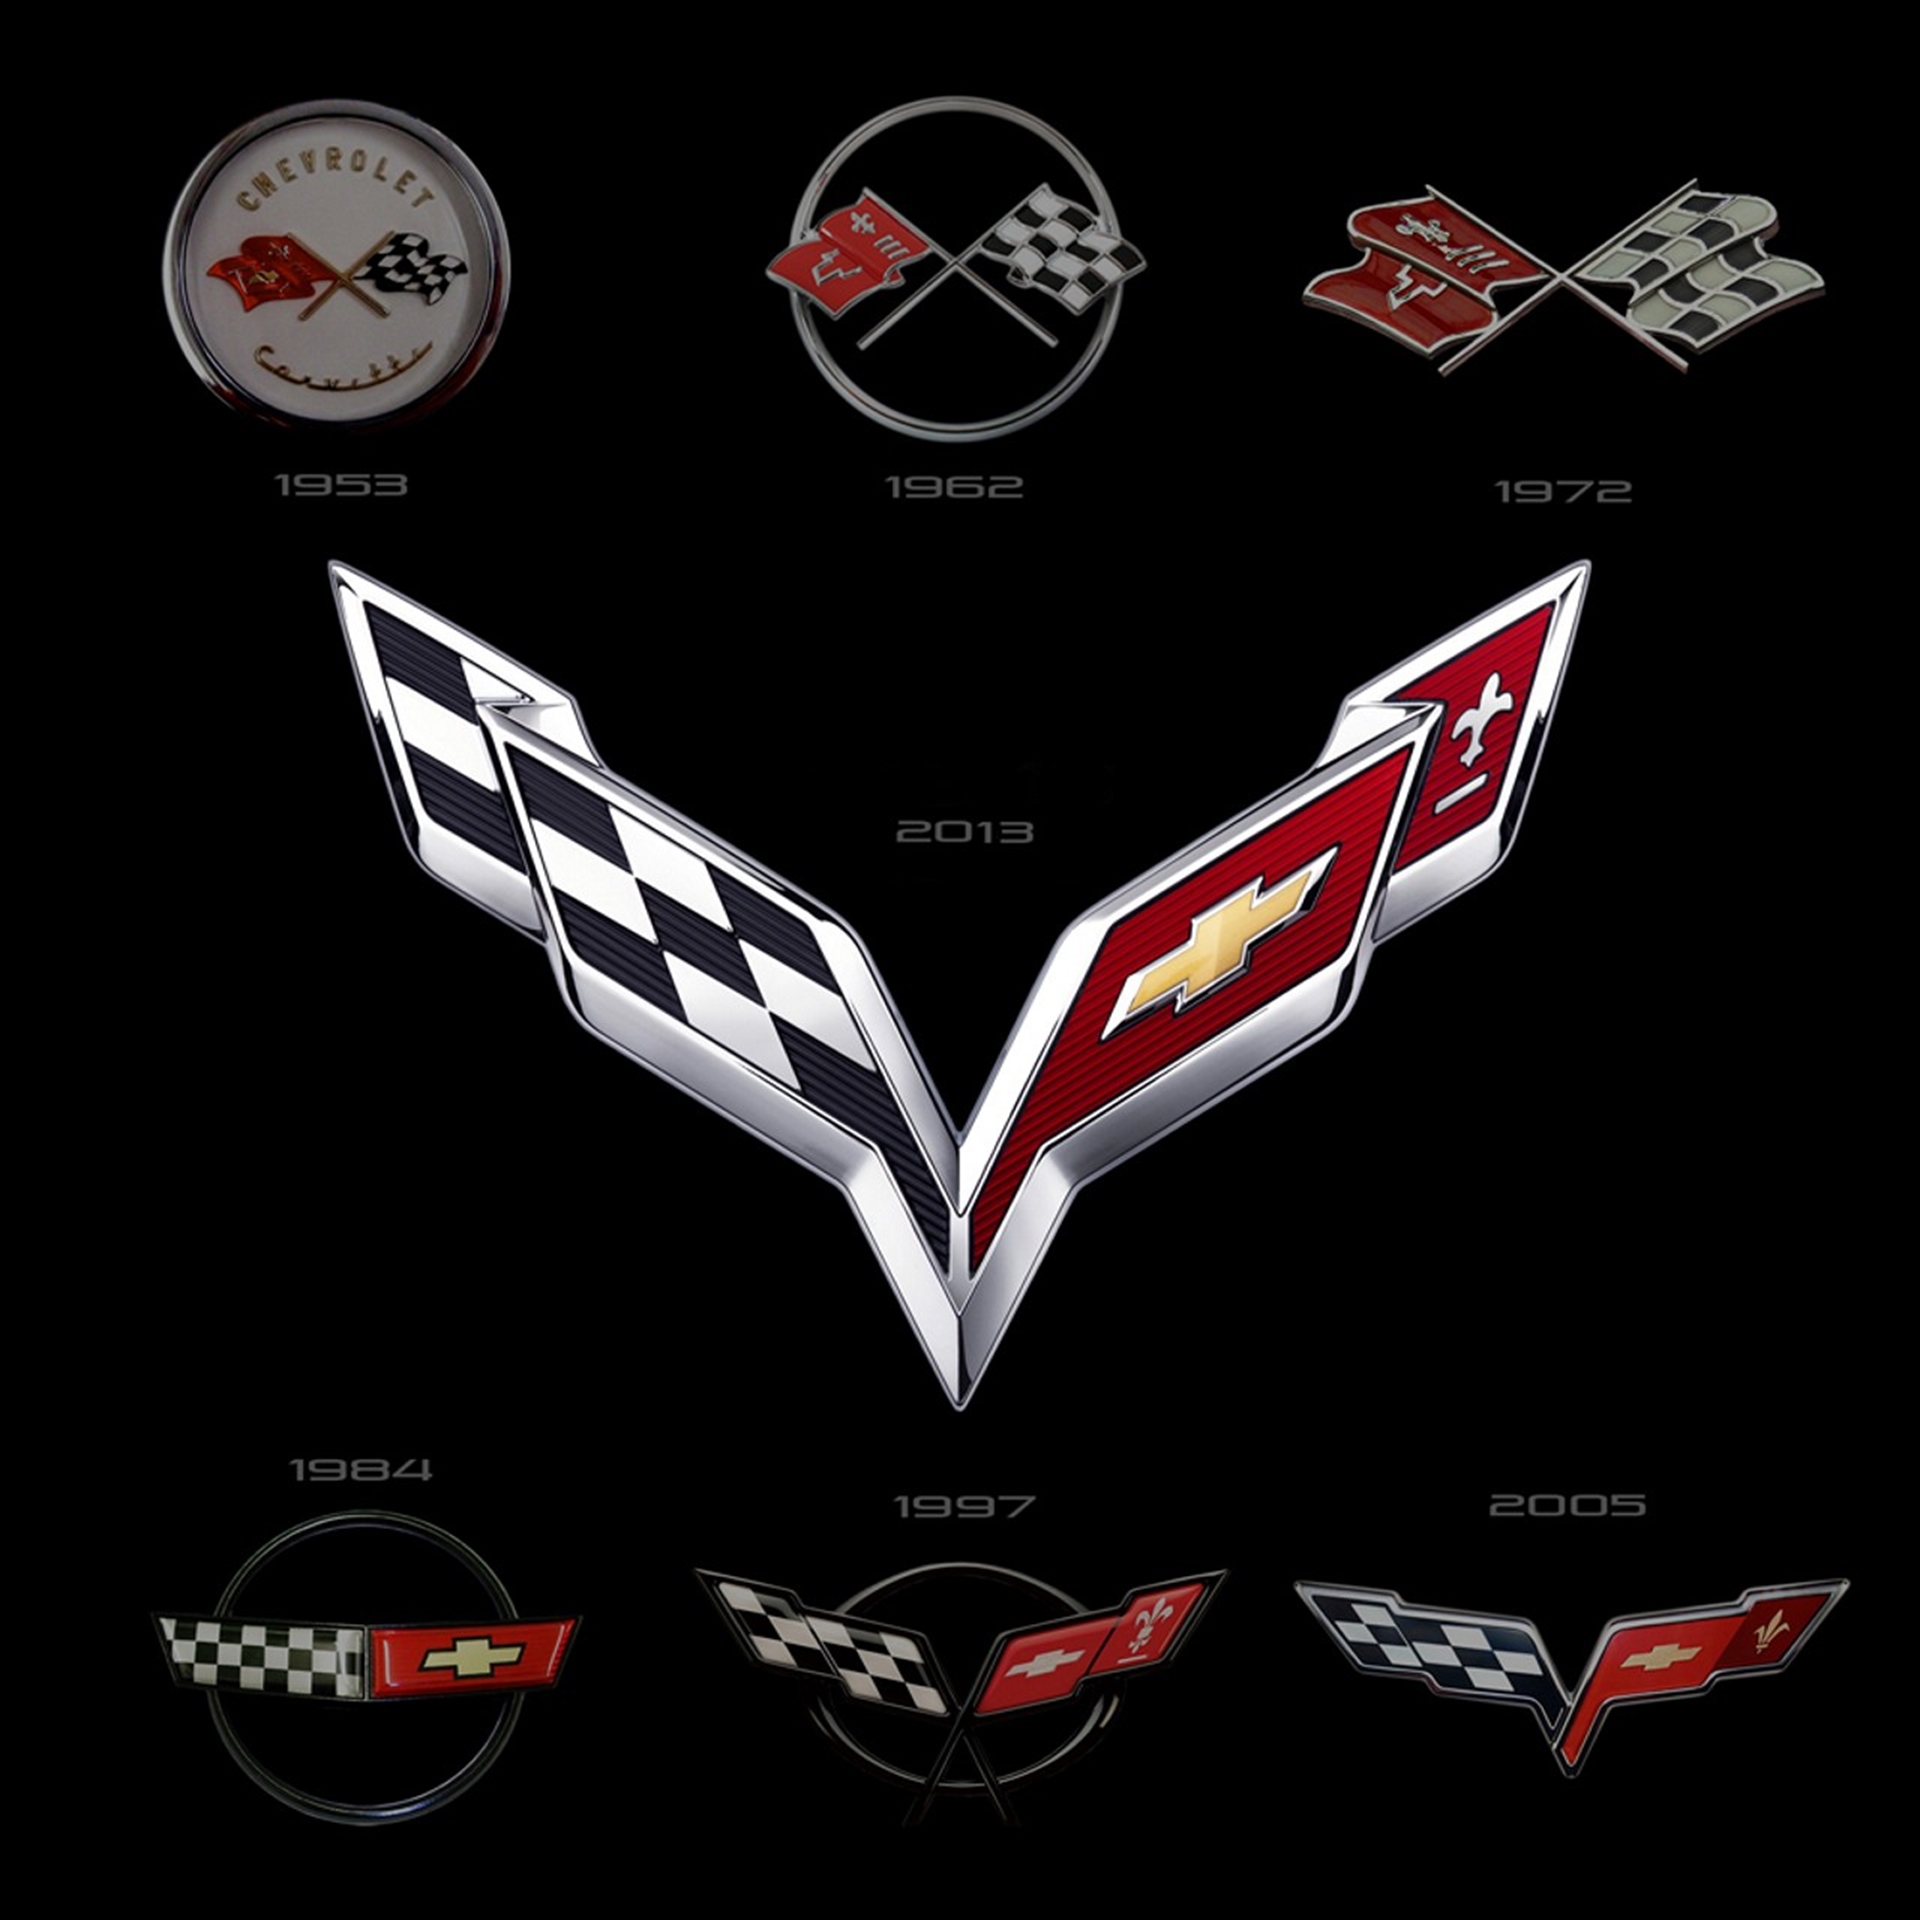 NEXT-GENERATION CORVETTE TO DEBUT AT THE DETROIT MOTOR SHOW IN JANUARY 2013?